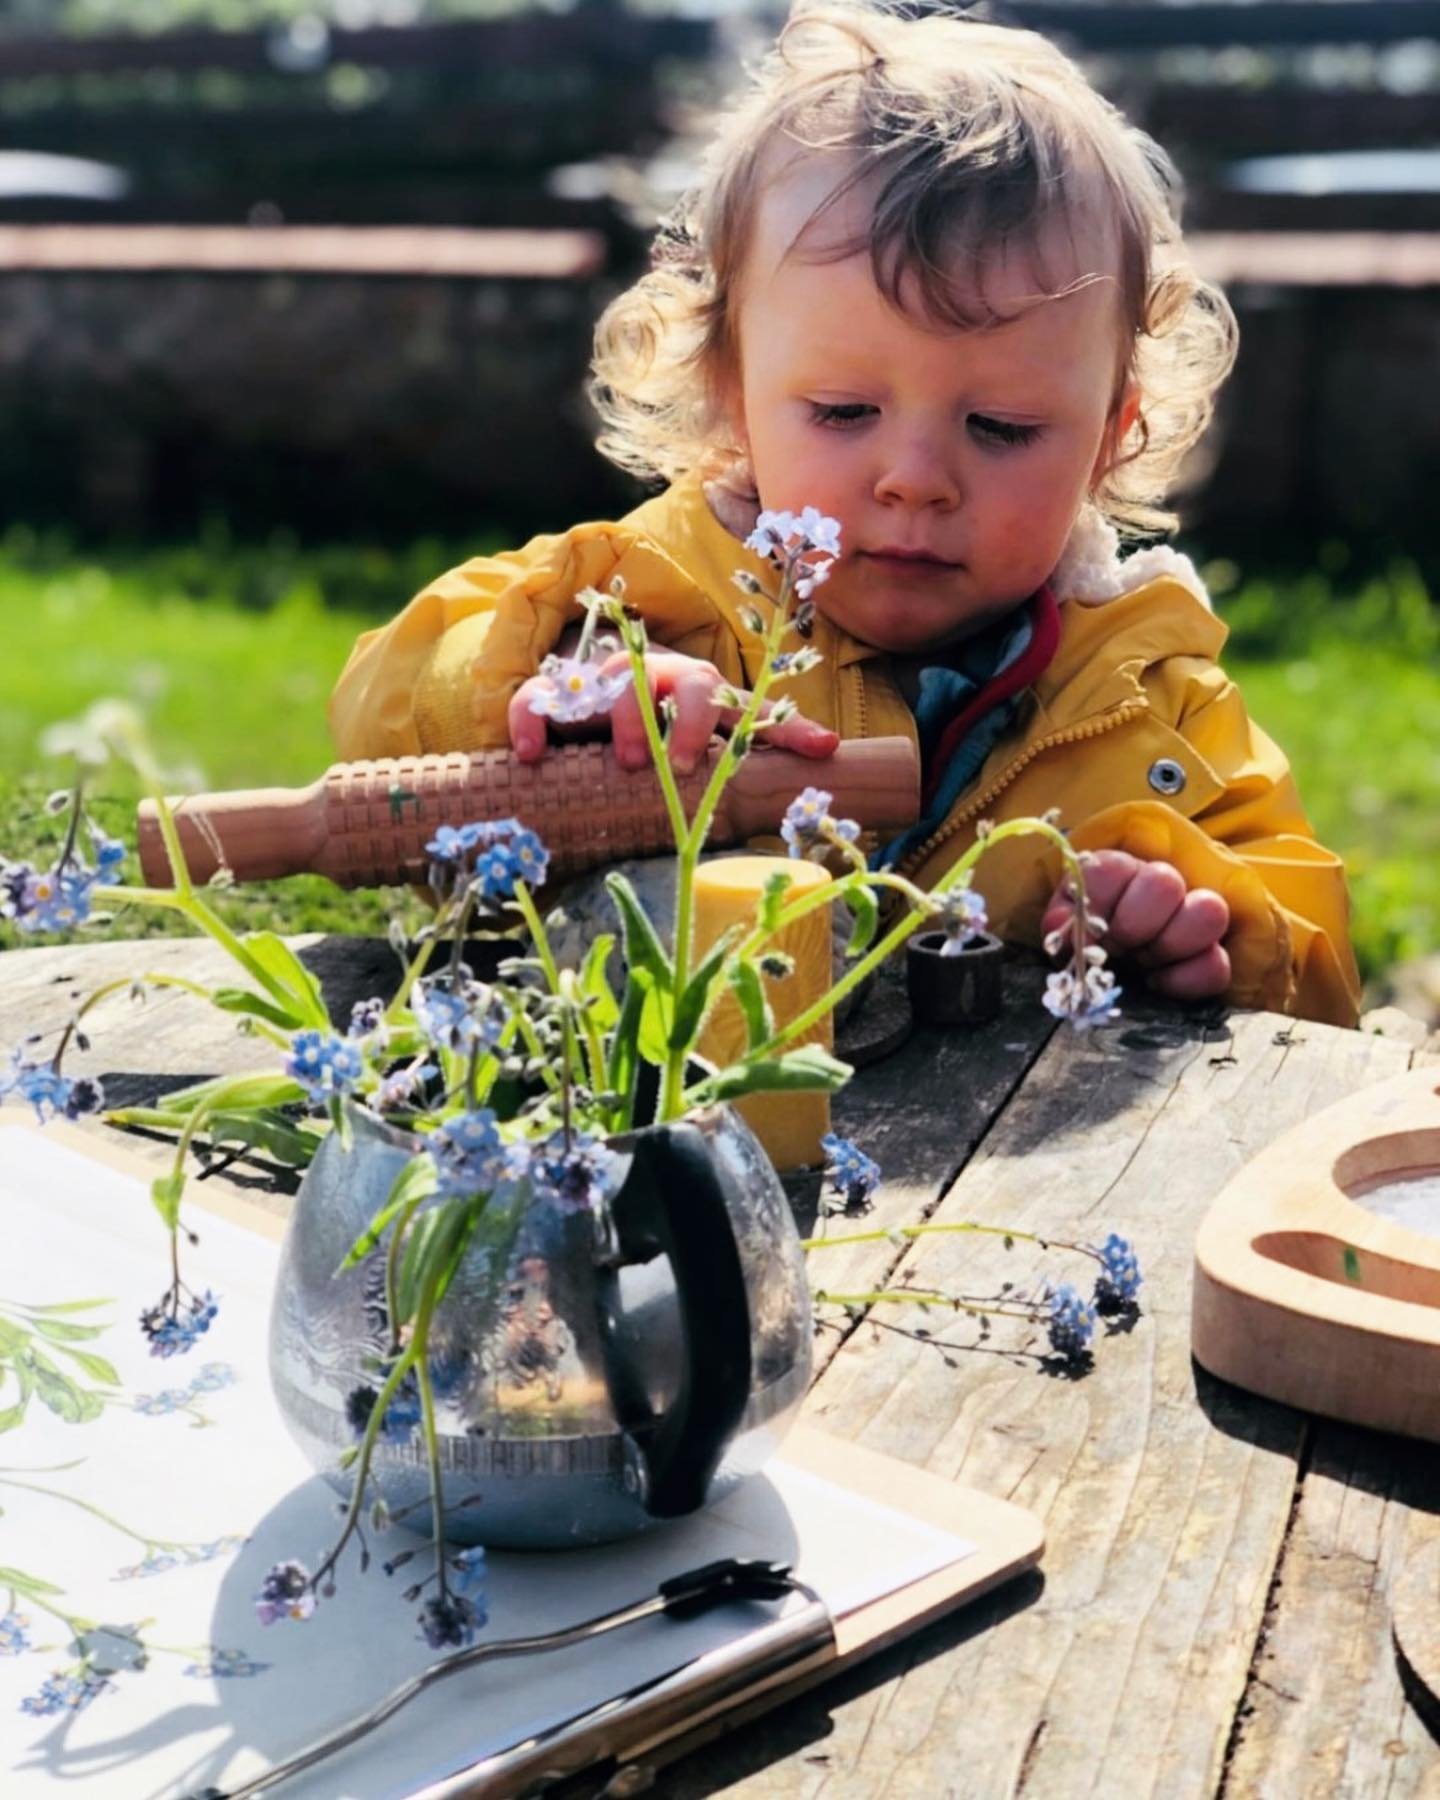 Forget-Me-Not! 

Discovering local flowers in the Outdoor Classroom at Naturally Learning Truro 🌱

Nurturing wild spaces in the Allotment garden to preserve these charming wildflowers! 

#thisisnaturallylearning